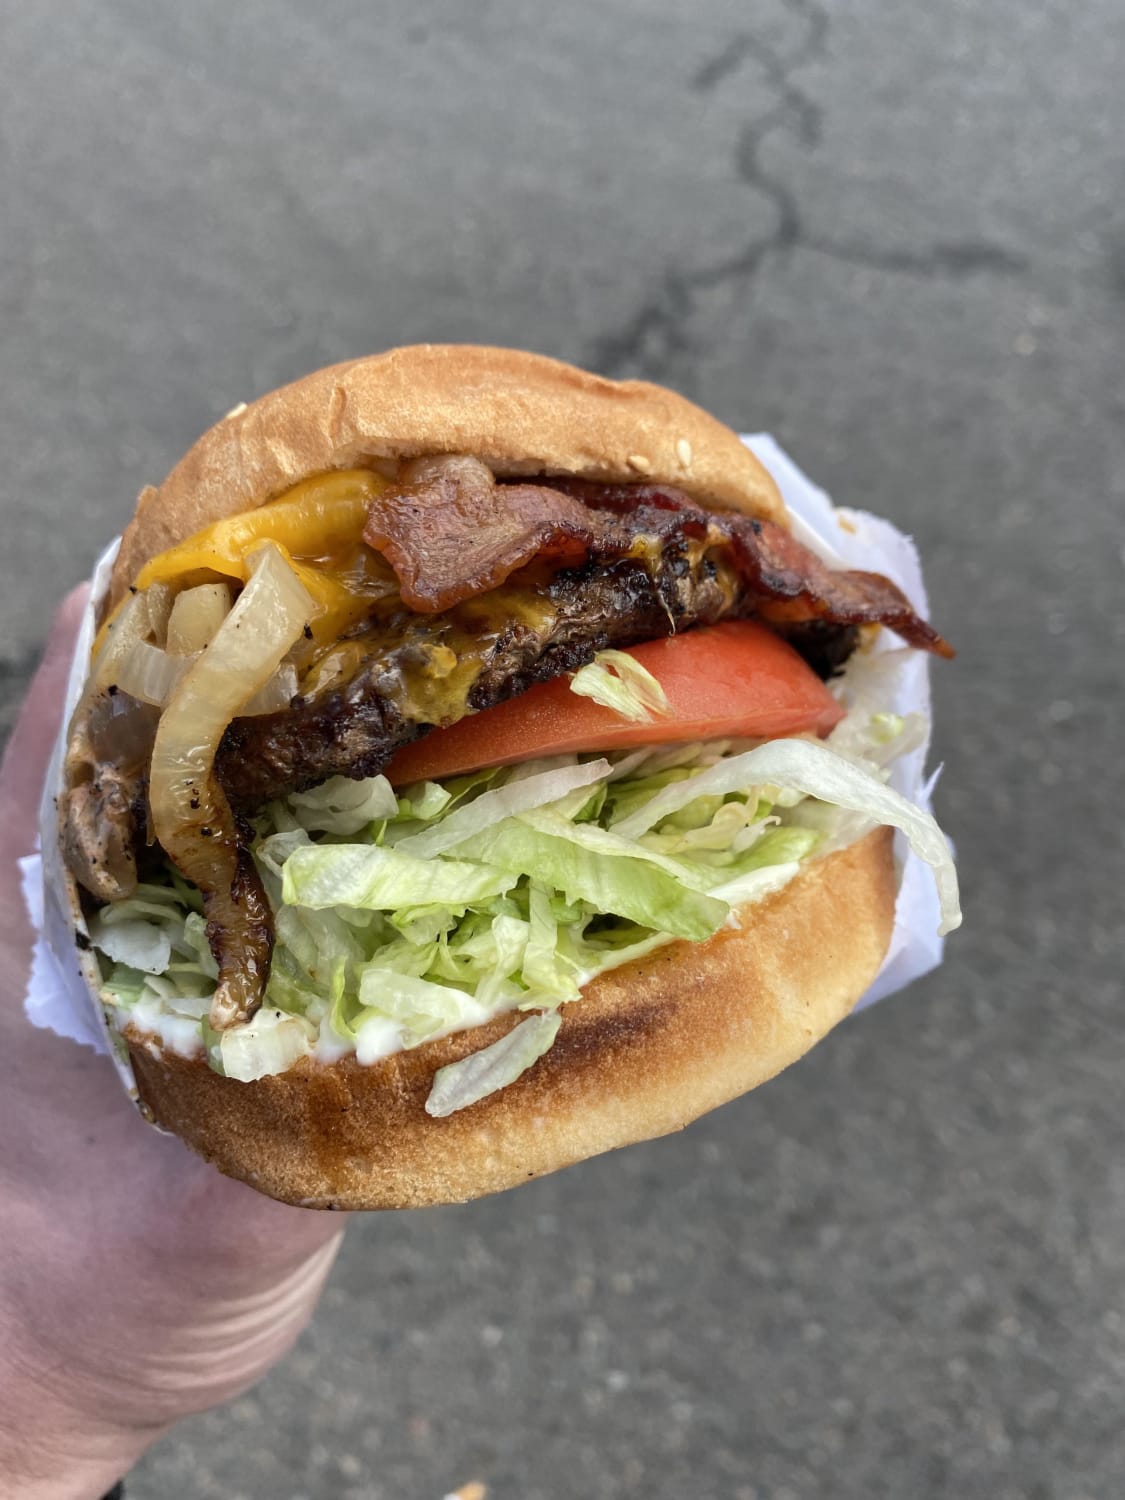 This beauty is from steak burger, a food truck out of sw Washington state. [I Ate]